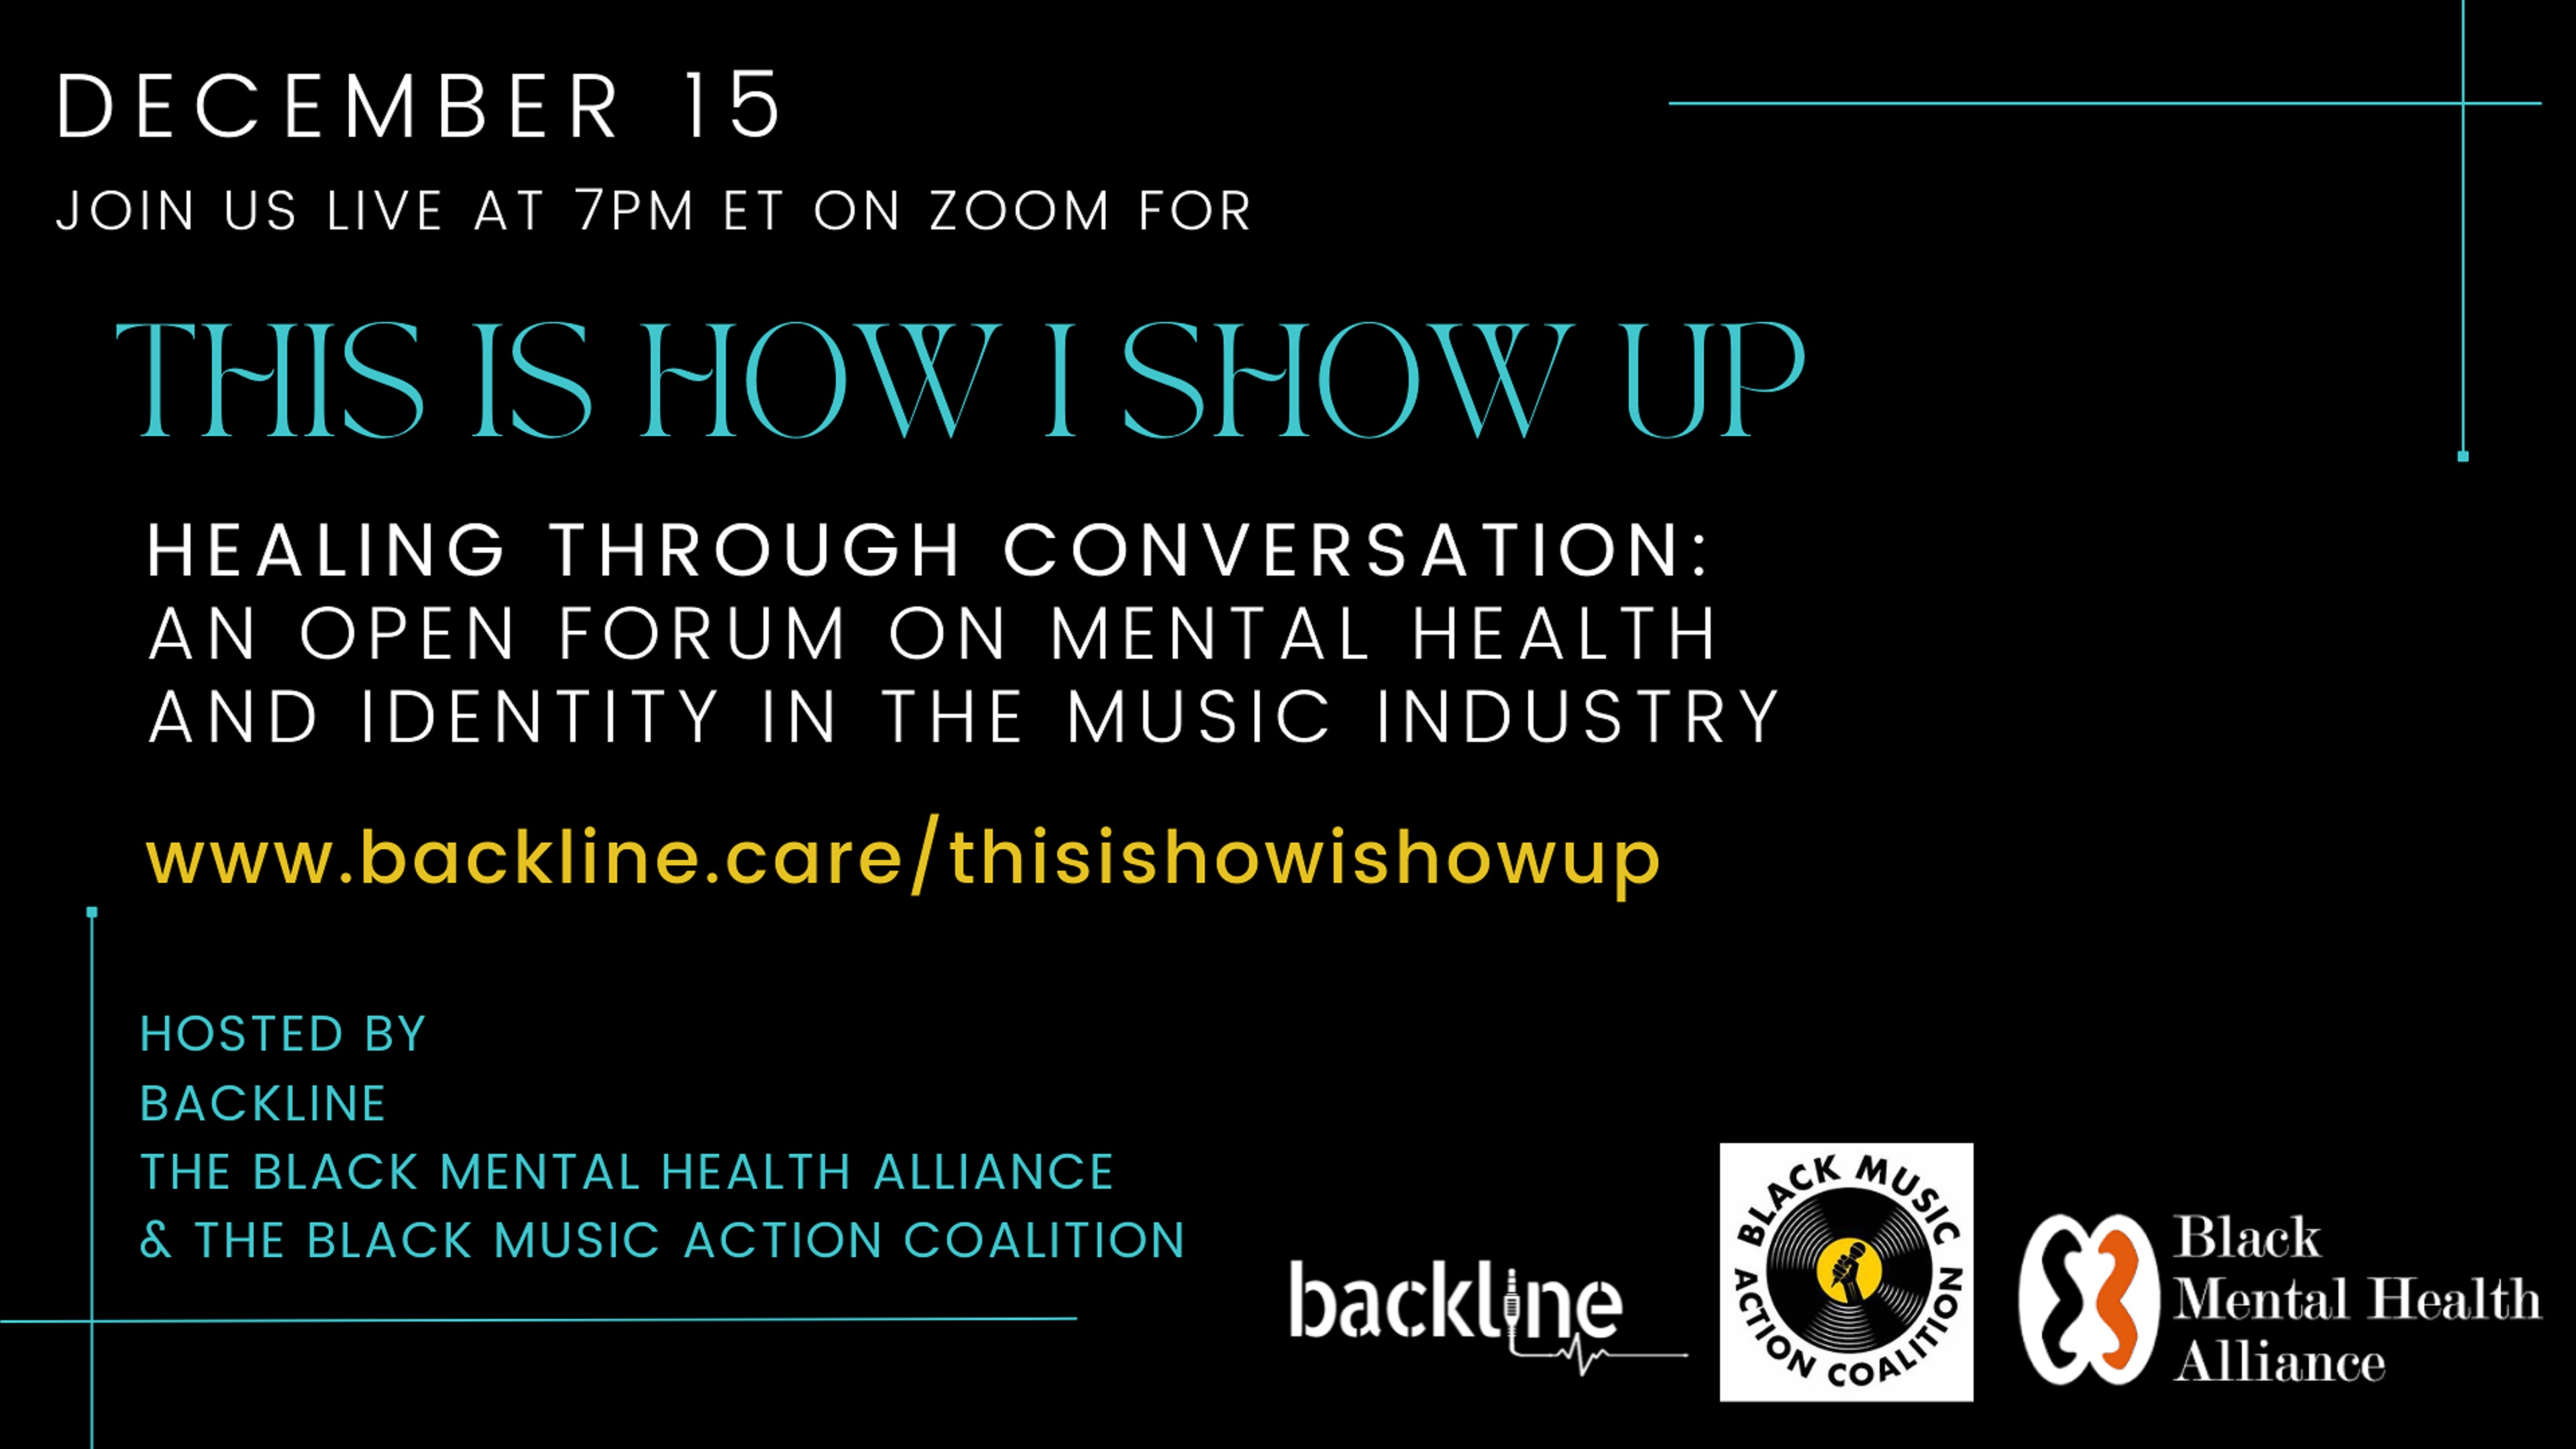 Black Music Action Coalition partners with Black Mental Health Alliance and Backline